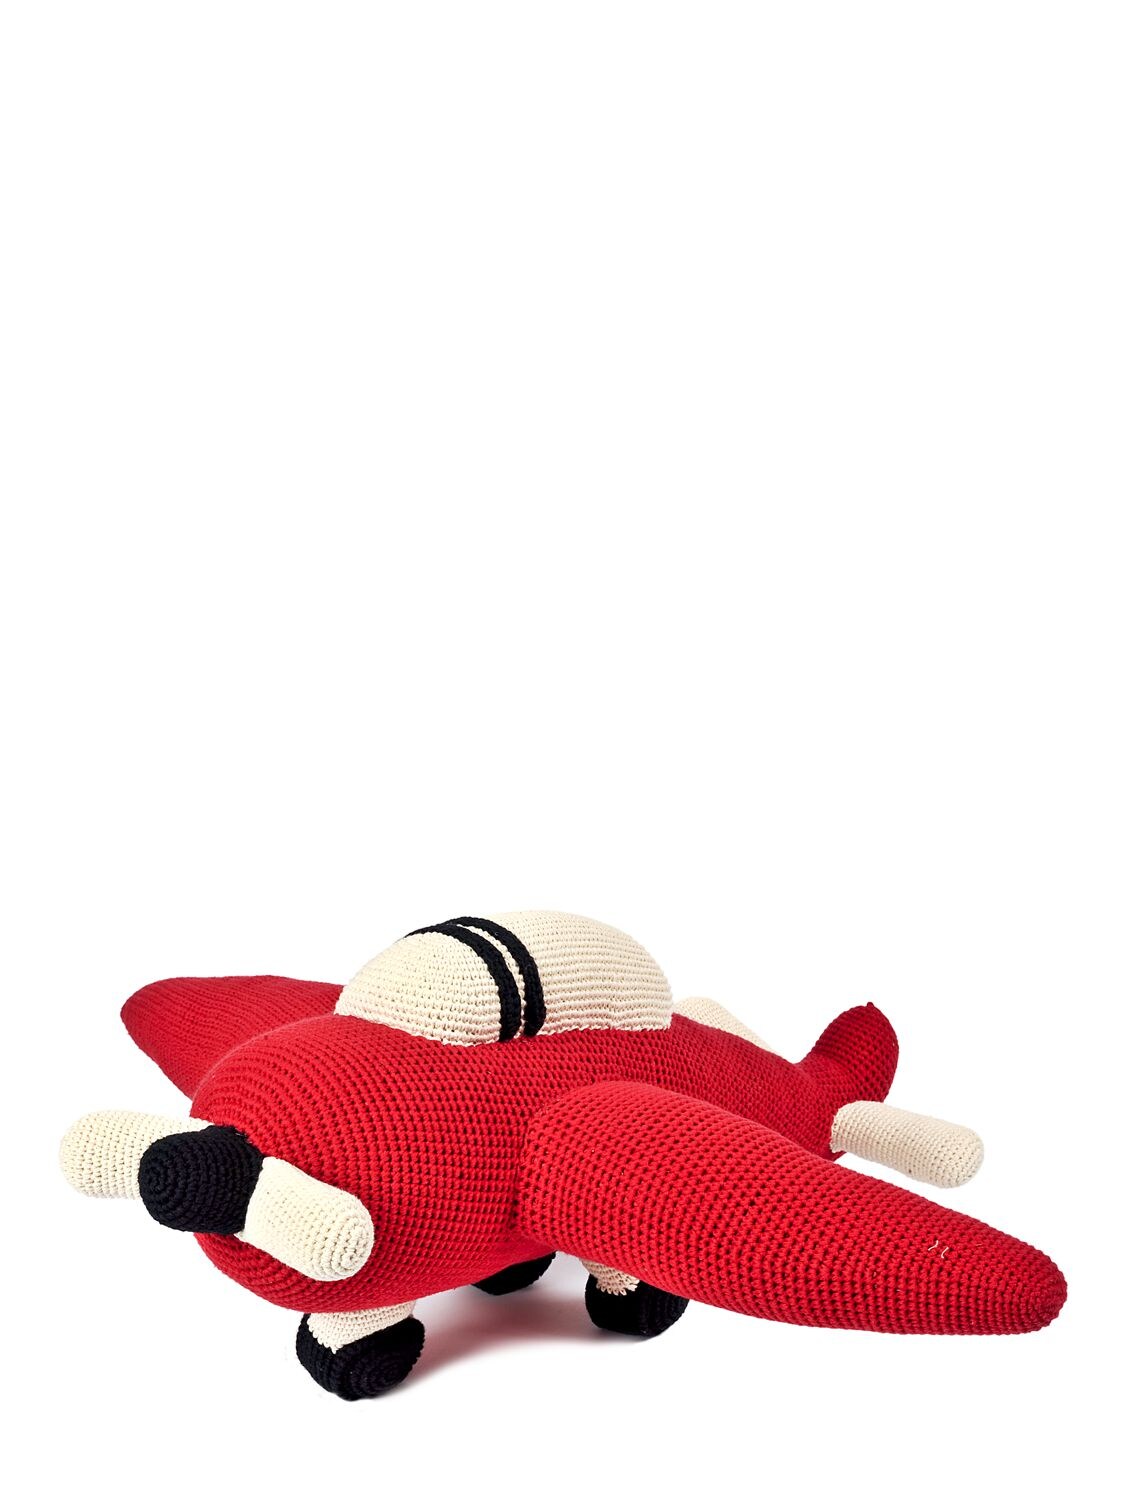 Anne-claire Petit Kids' Hand-crocheted Organic Cotton Airplane In Red